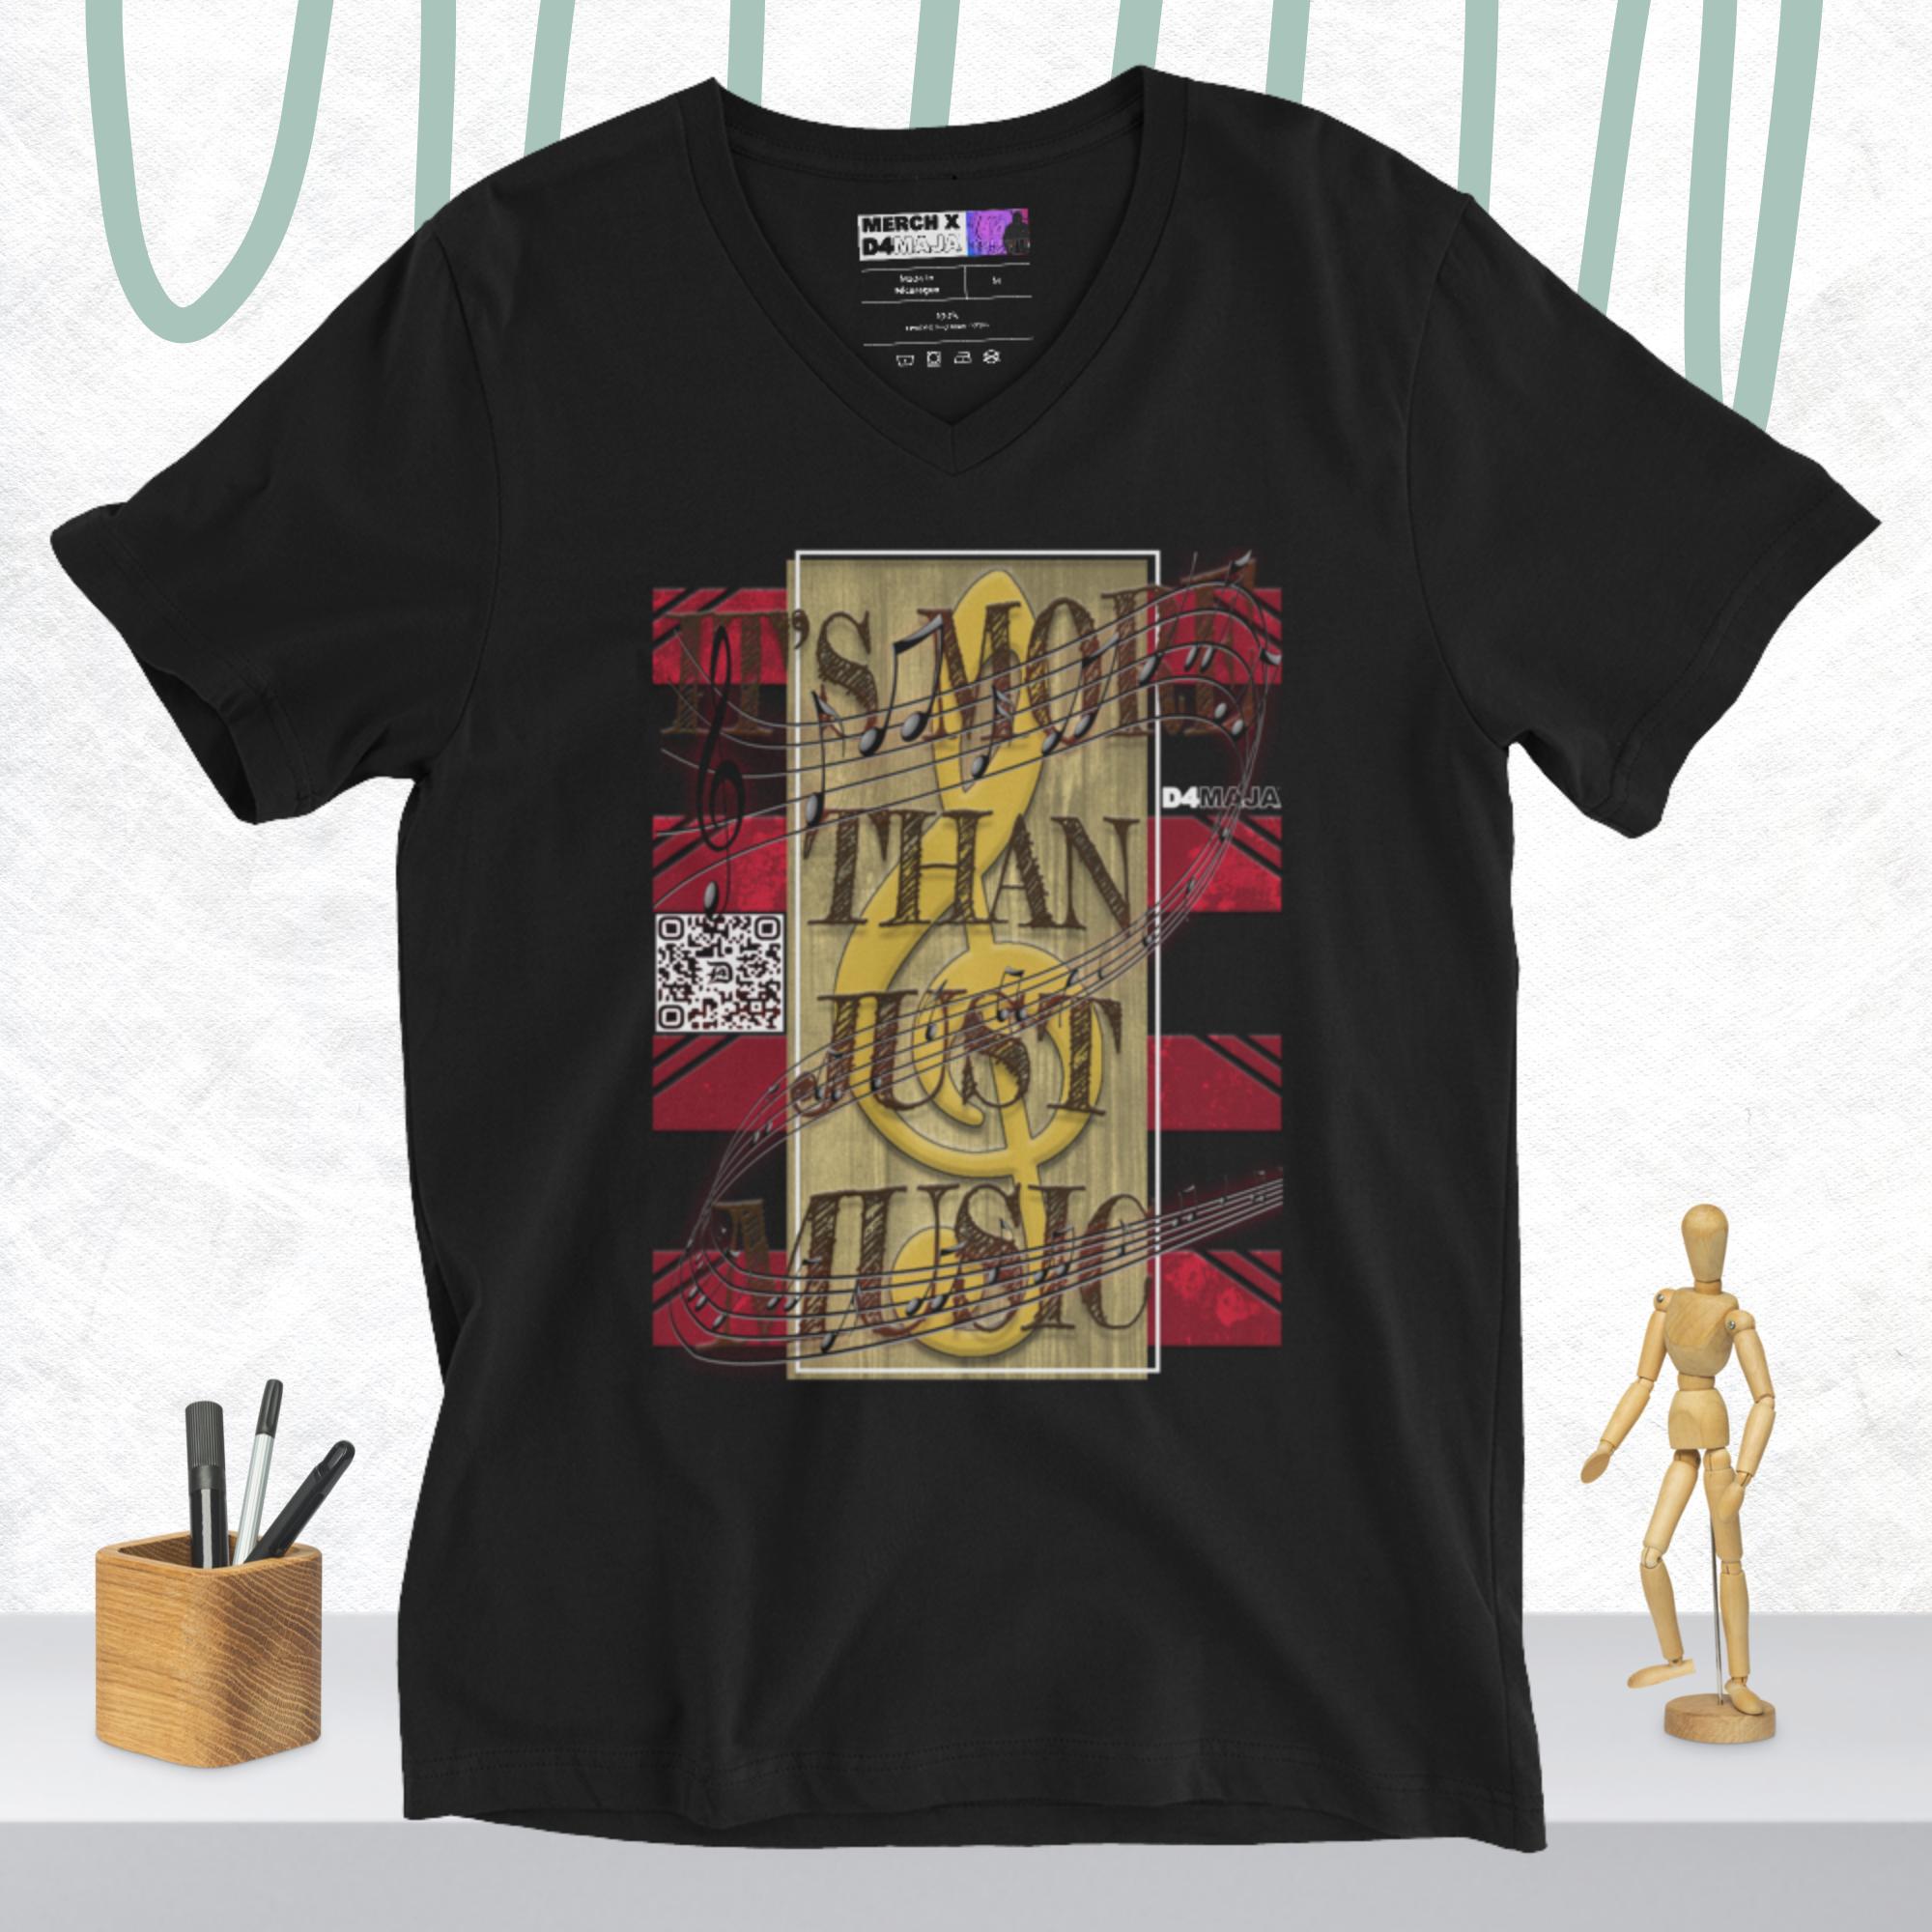 More Than Just The Music logo styled t-shirt